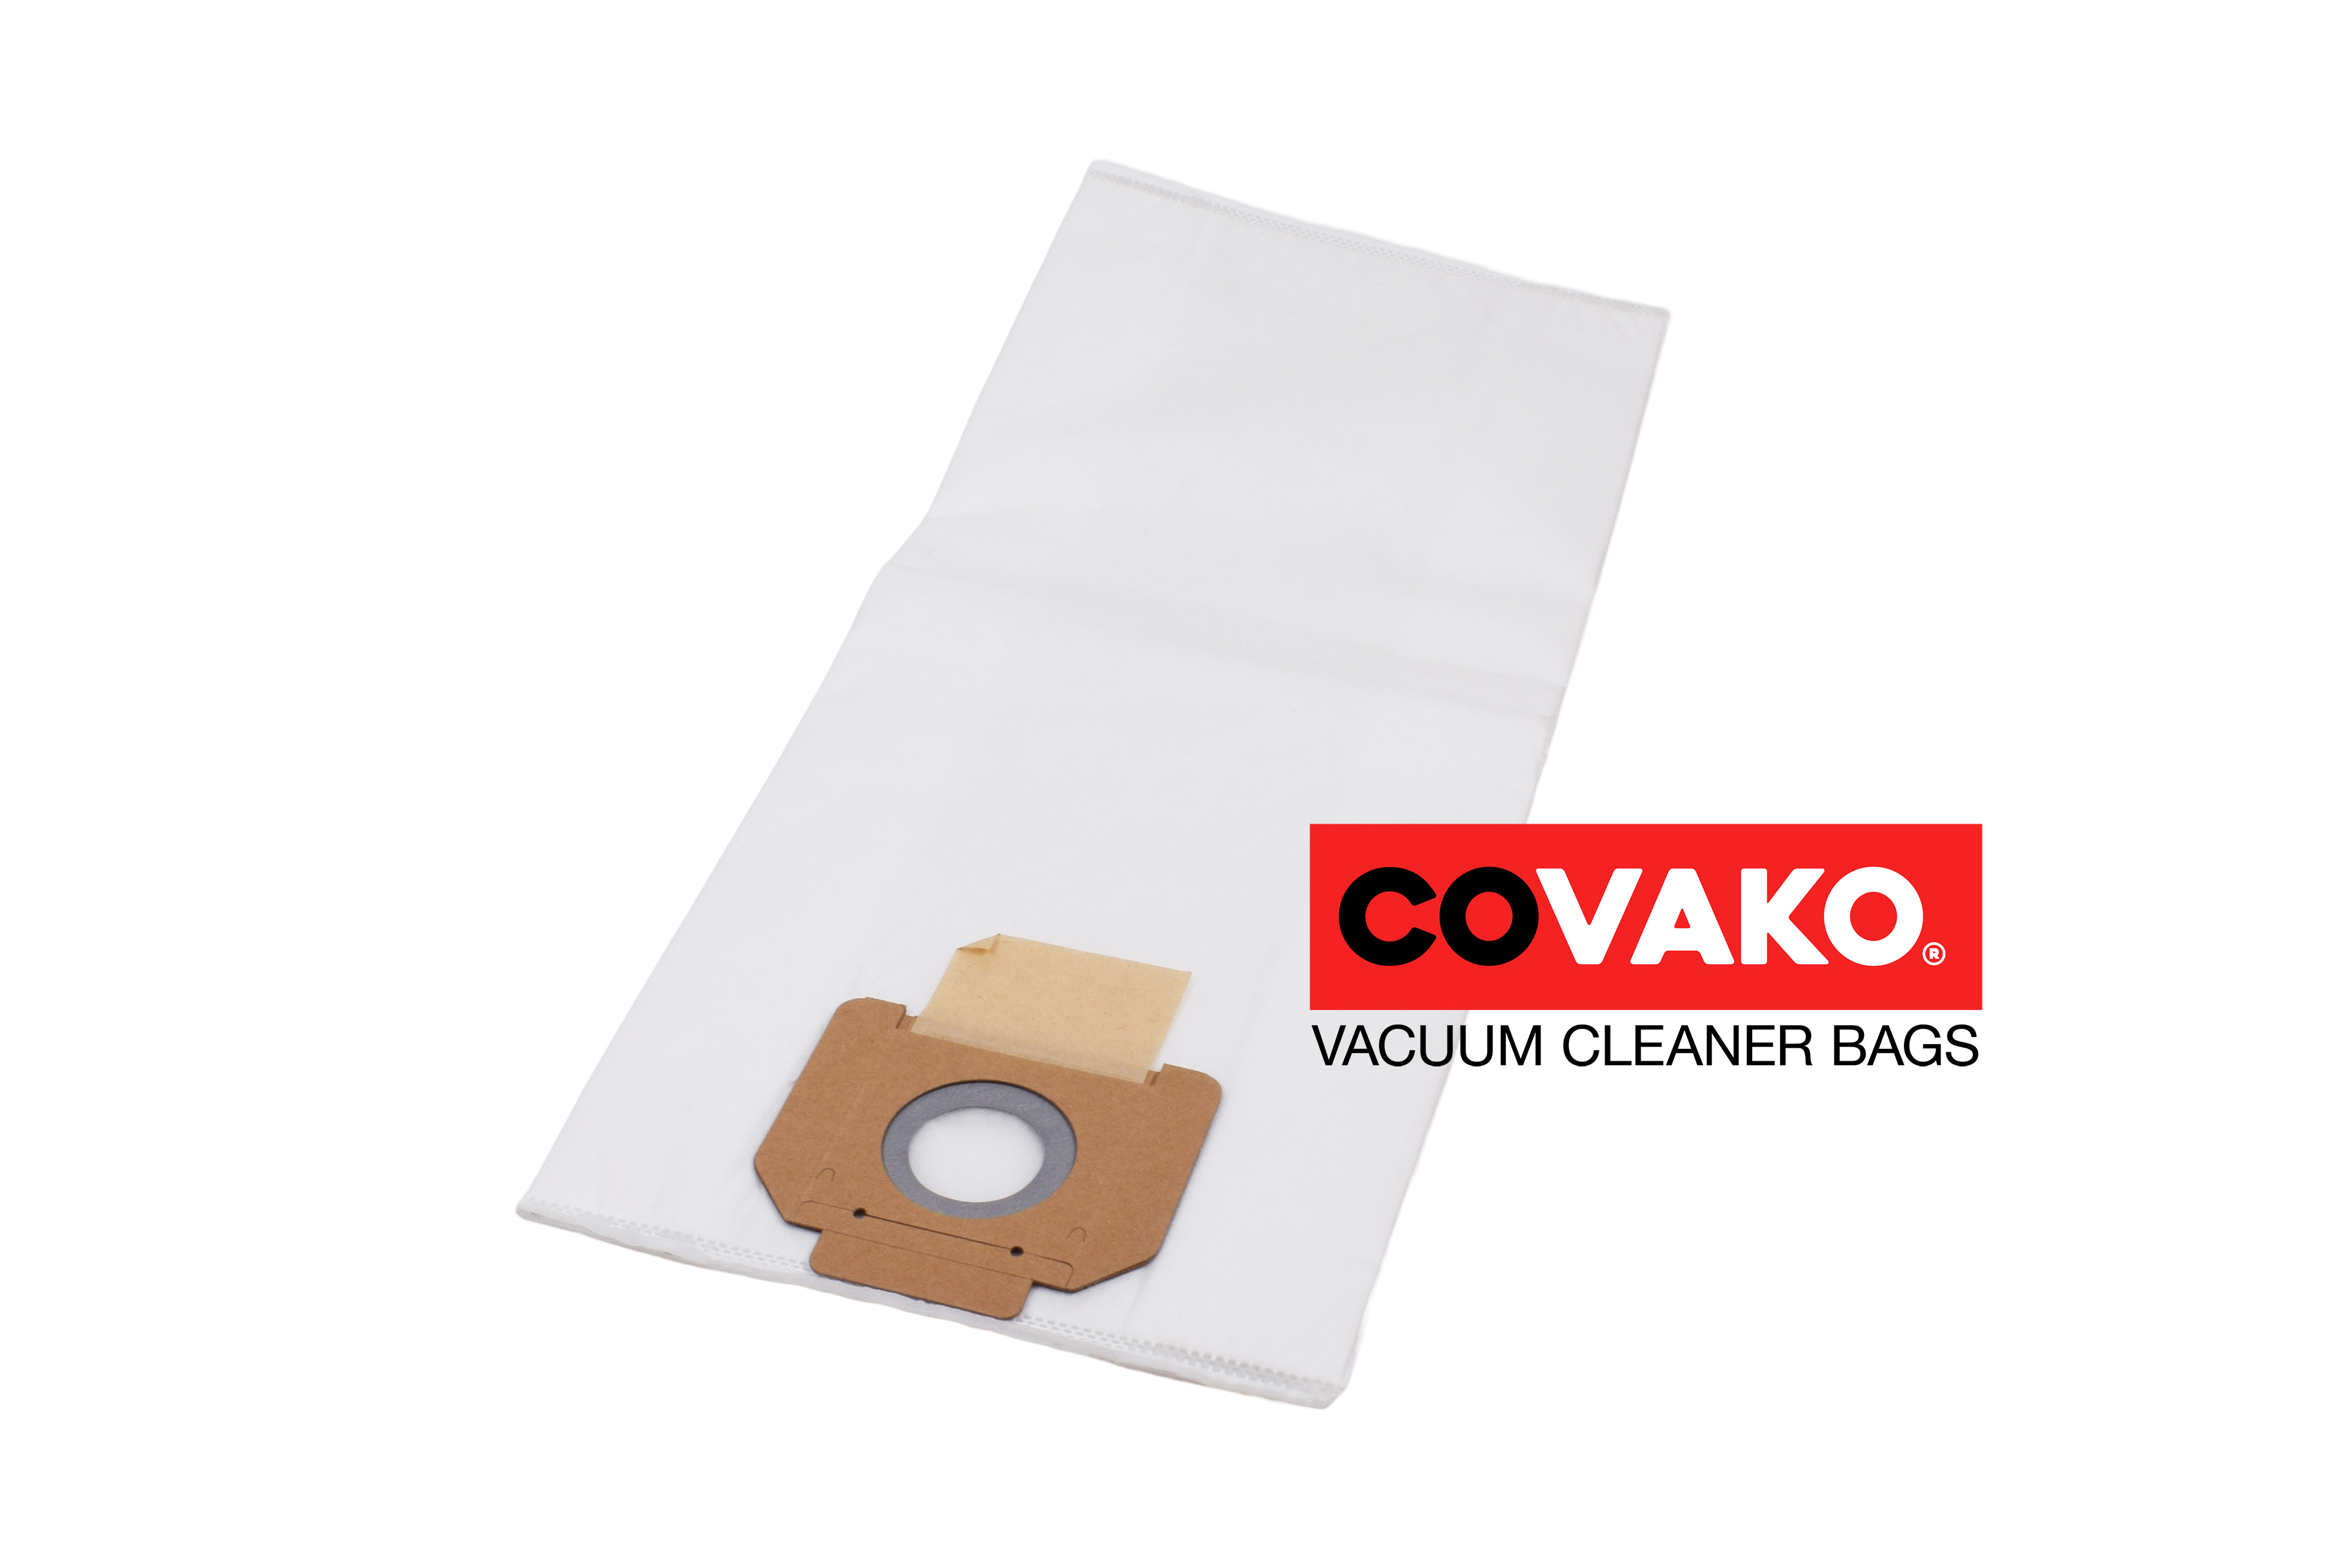 Cleancraft wetCat 362 ET / Synthesis - Cleancraft vacuum cleaner bags